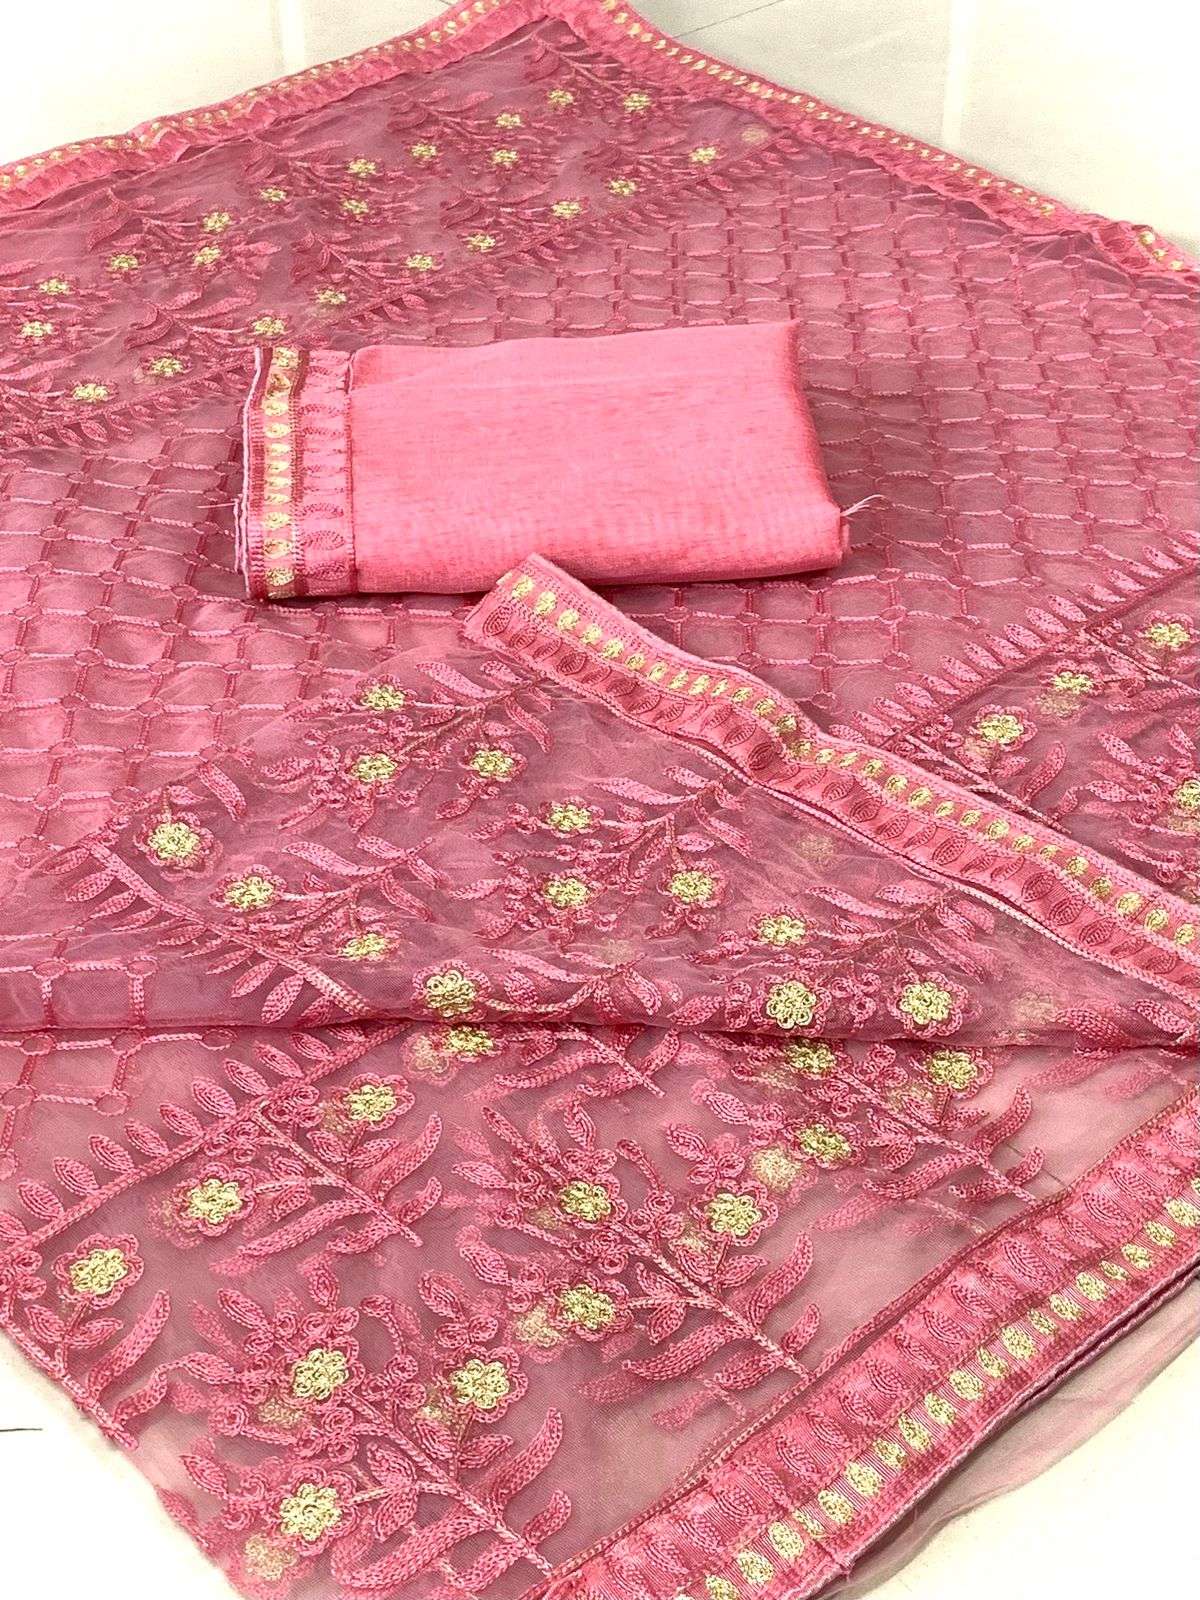 Vaamika 5 Soft Net Saree With Thread Embroidery & Blouse Banglory Silk